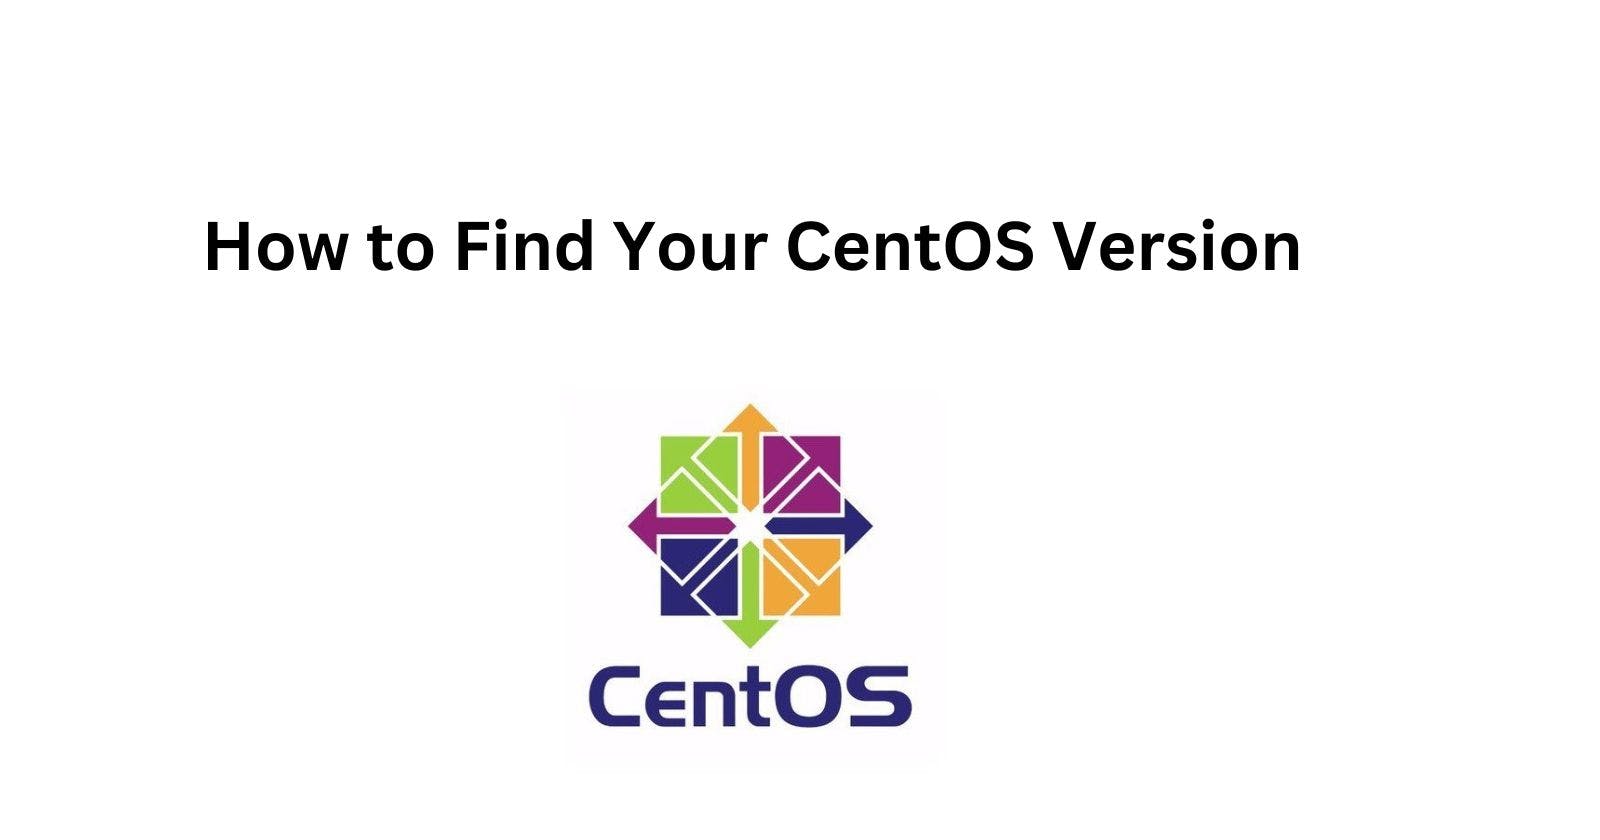 How to Find Your CentOS Version